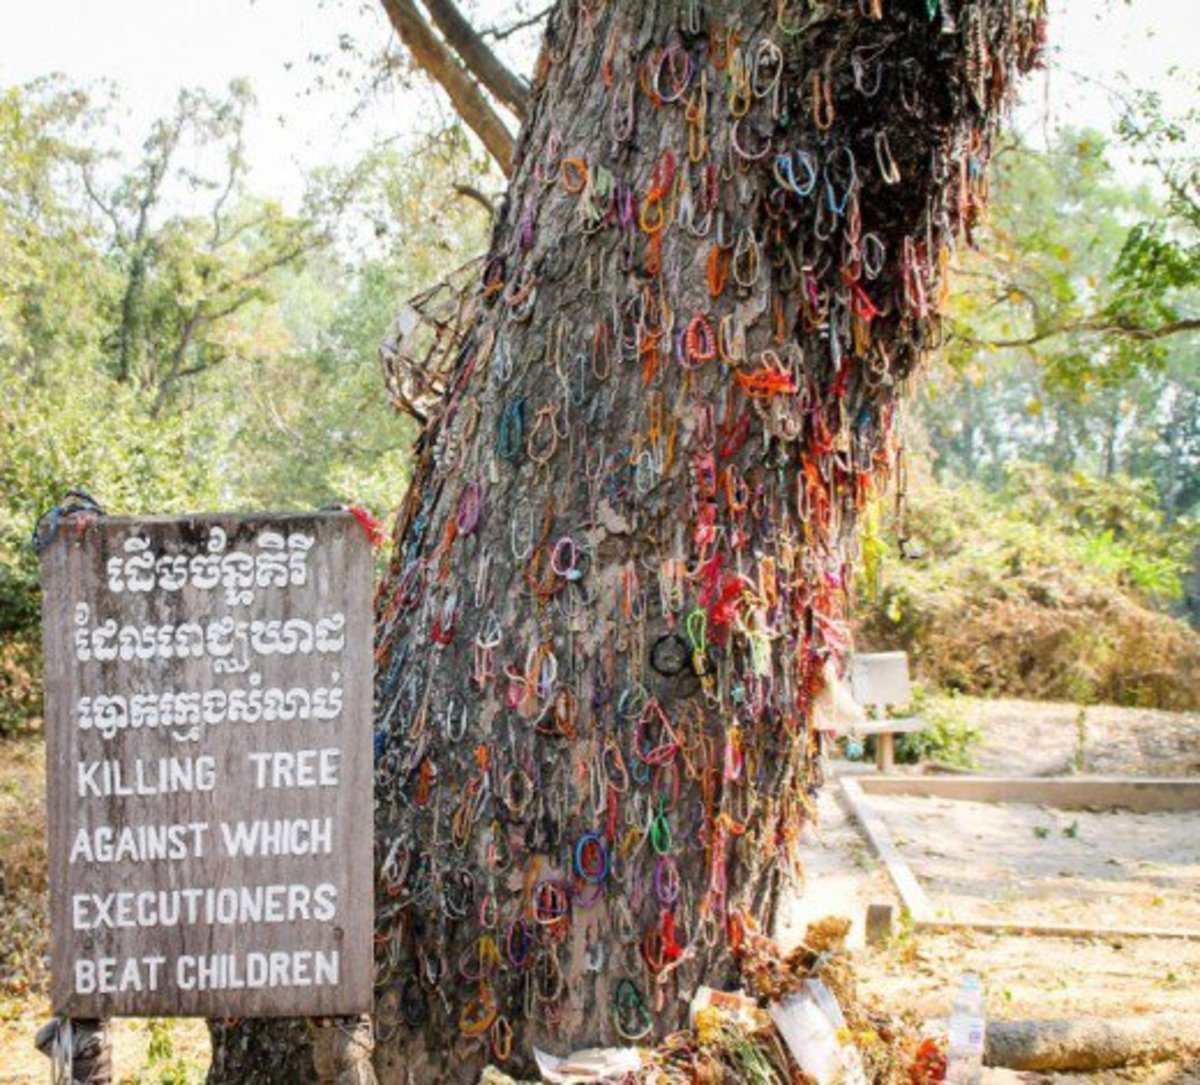 Between 1975-1979, up to two million people died in the Cambodia killing fields.